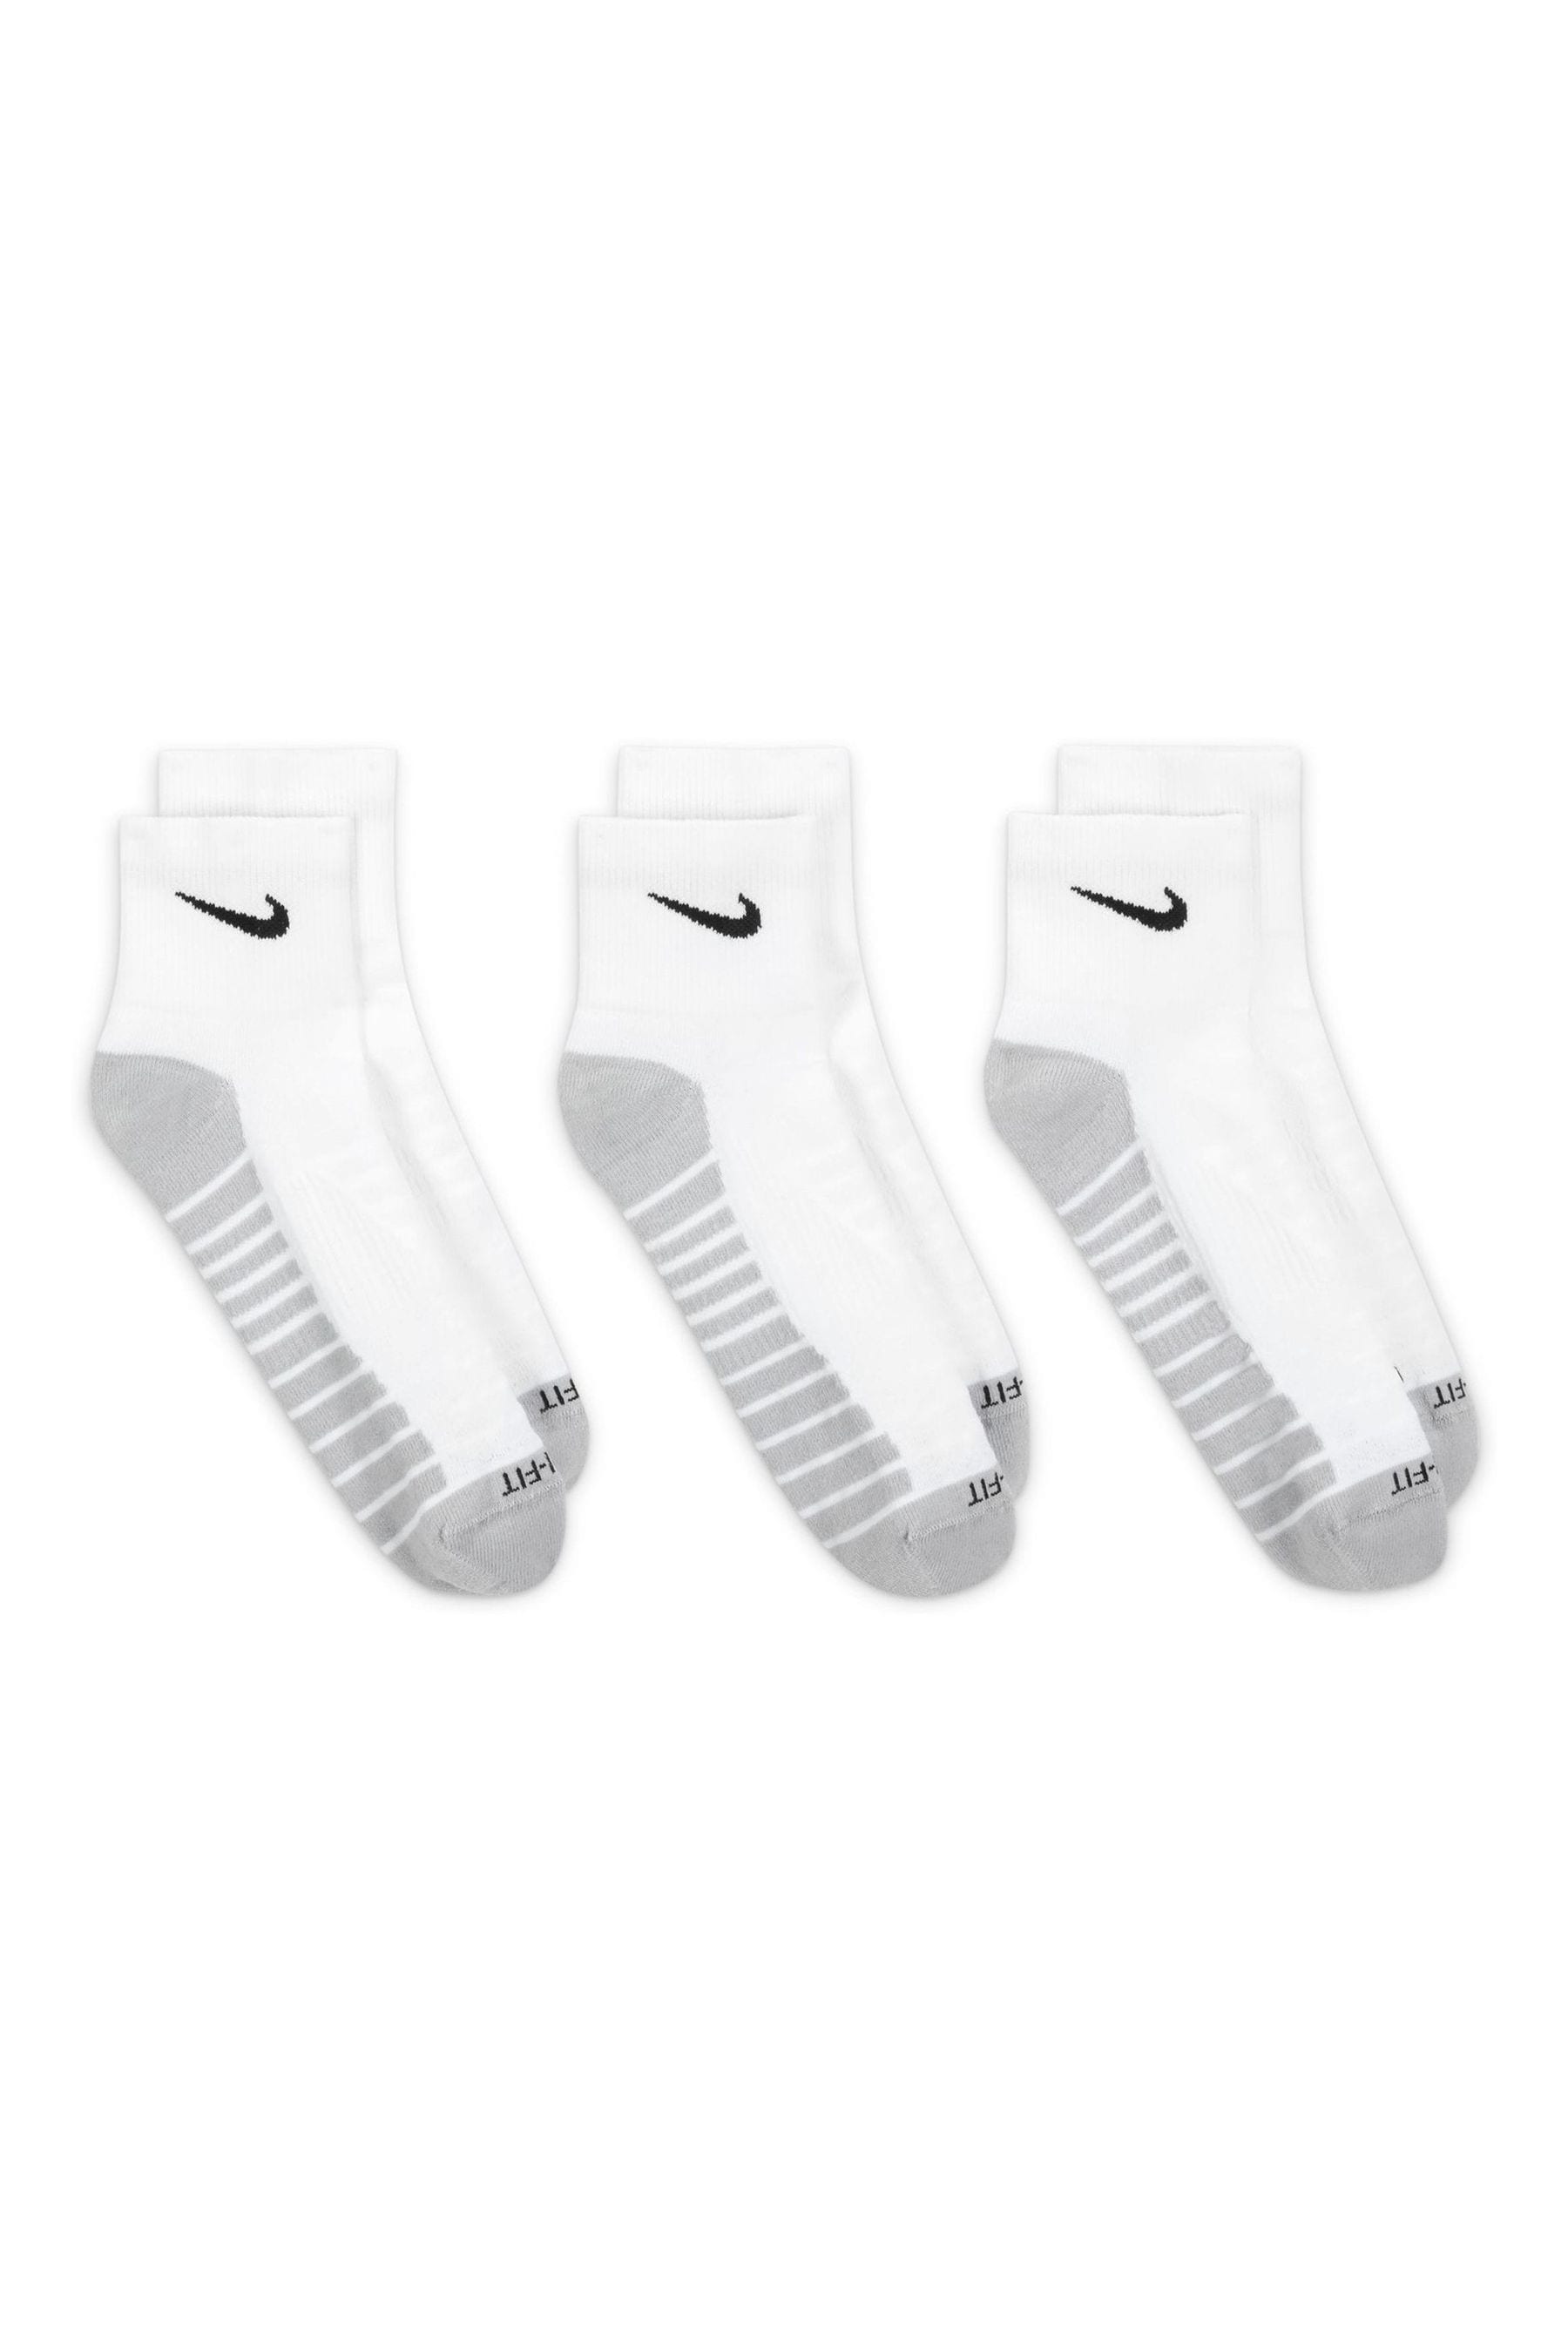 Buy Nike White 3 Pack Cushioned Crew Socks Adult from the Next UK ...